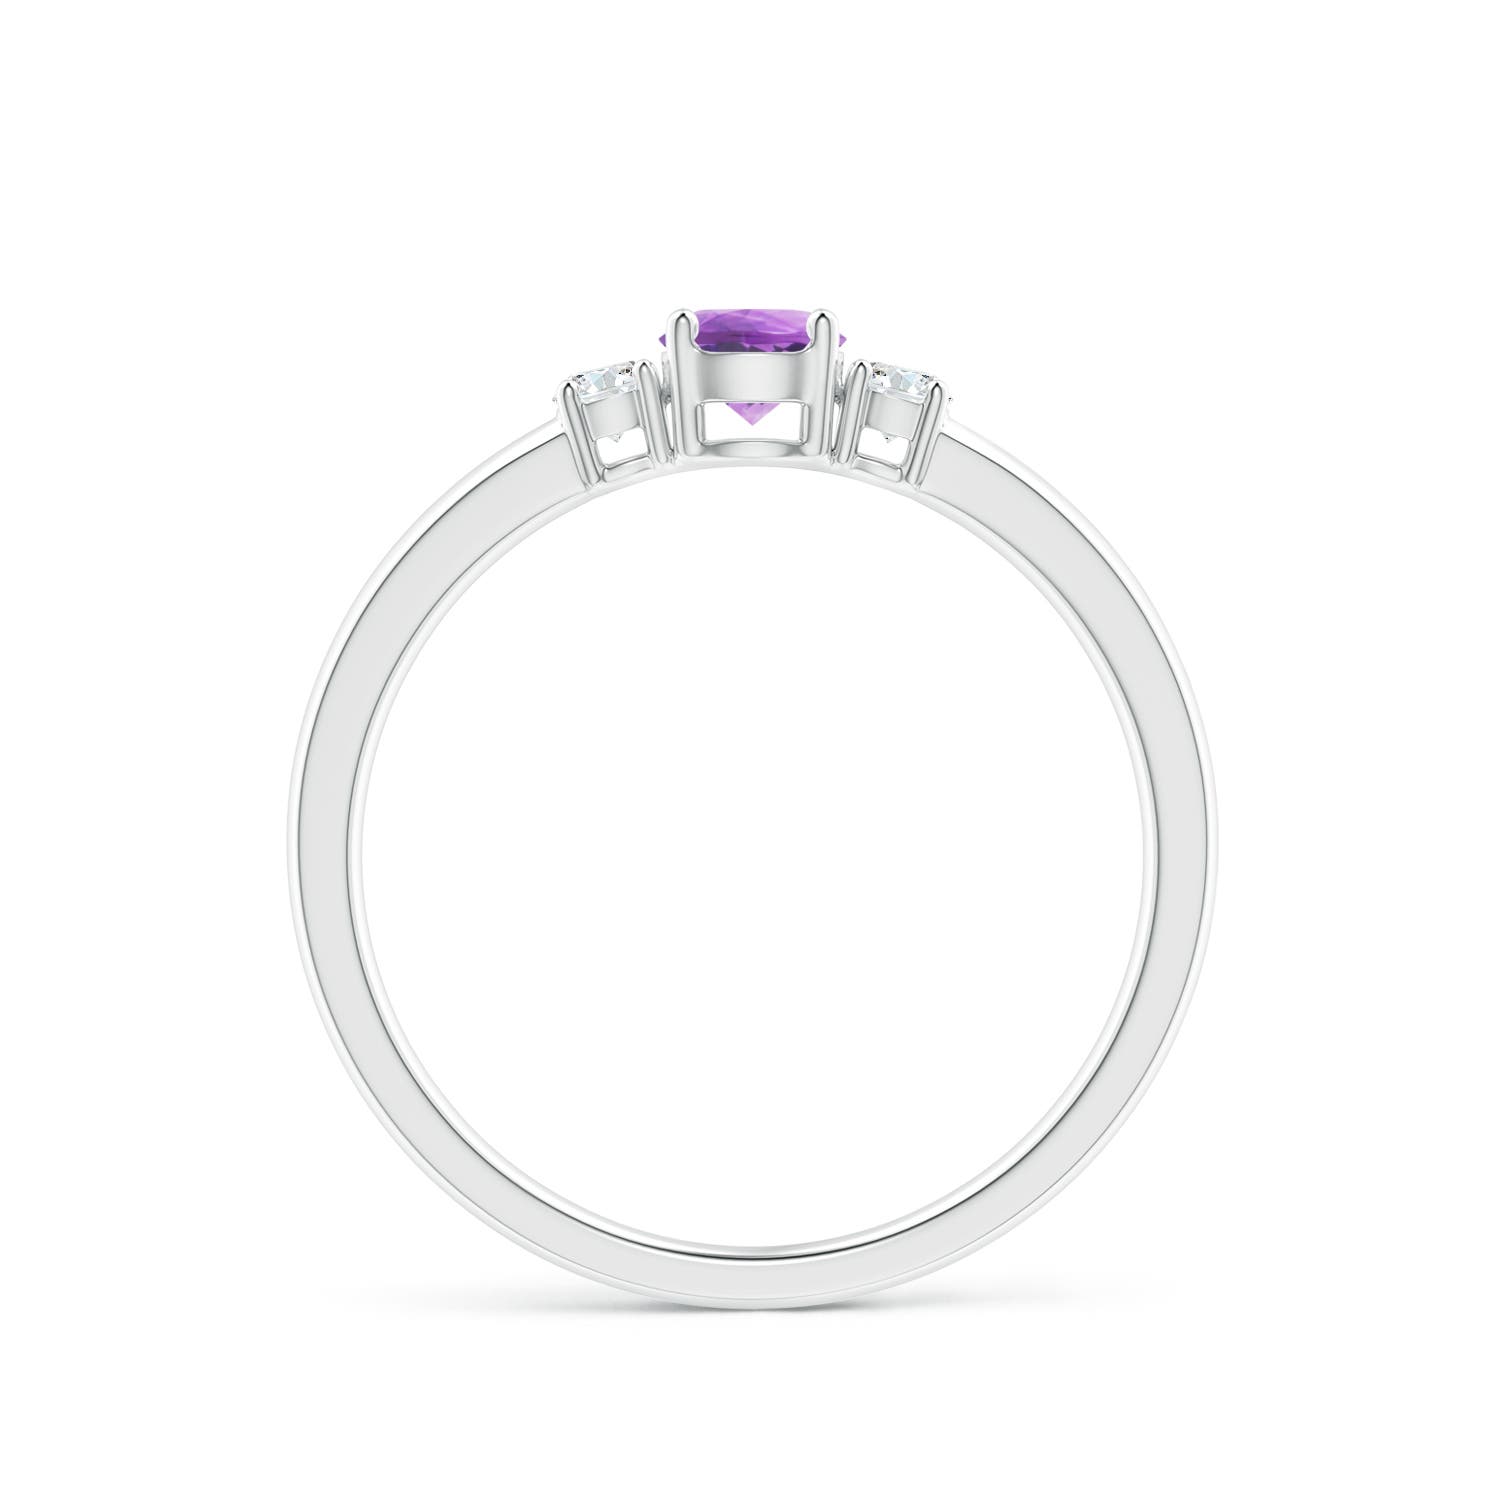 A - Amethyst / 0.39 CT / 14 KT White Gold